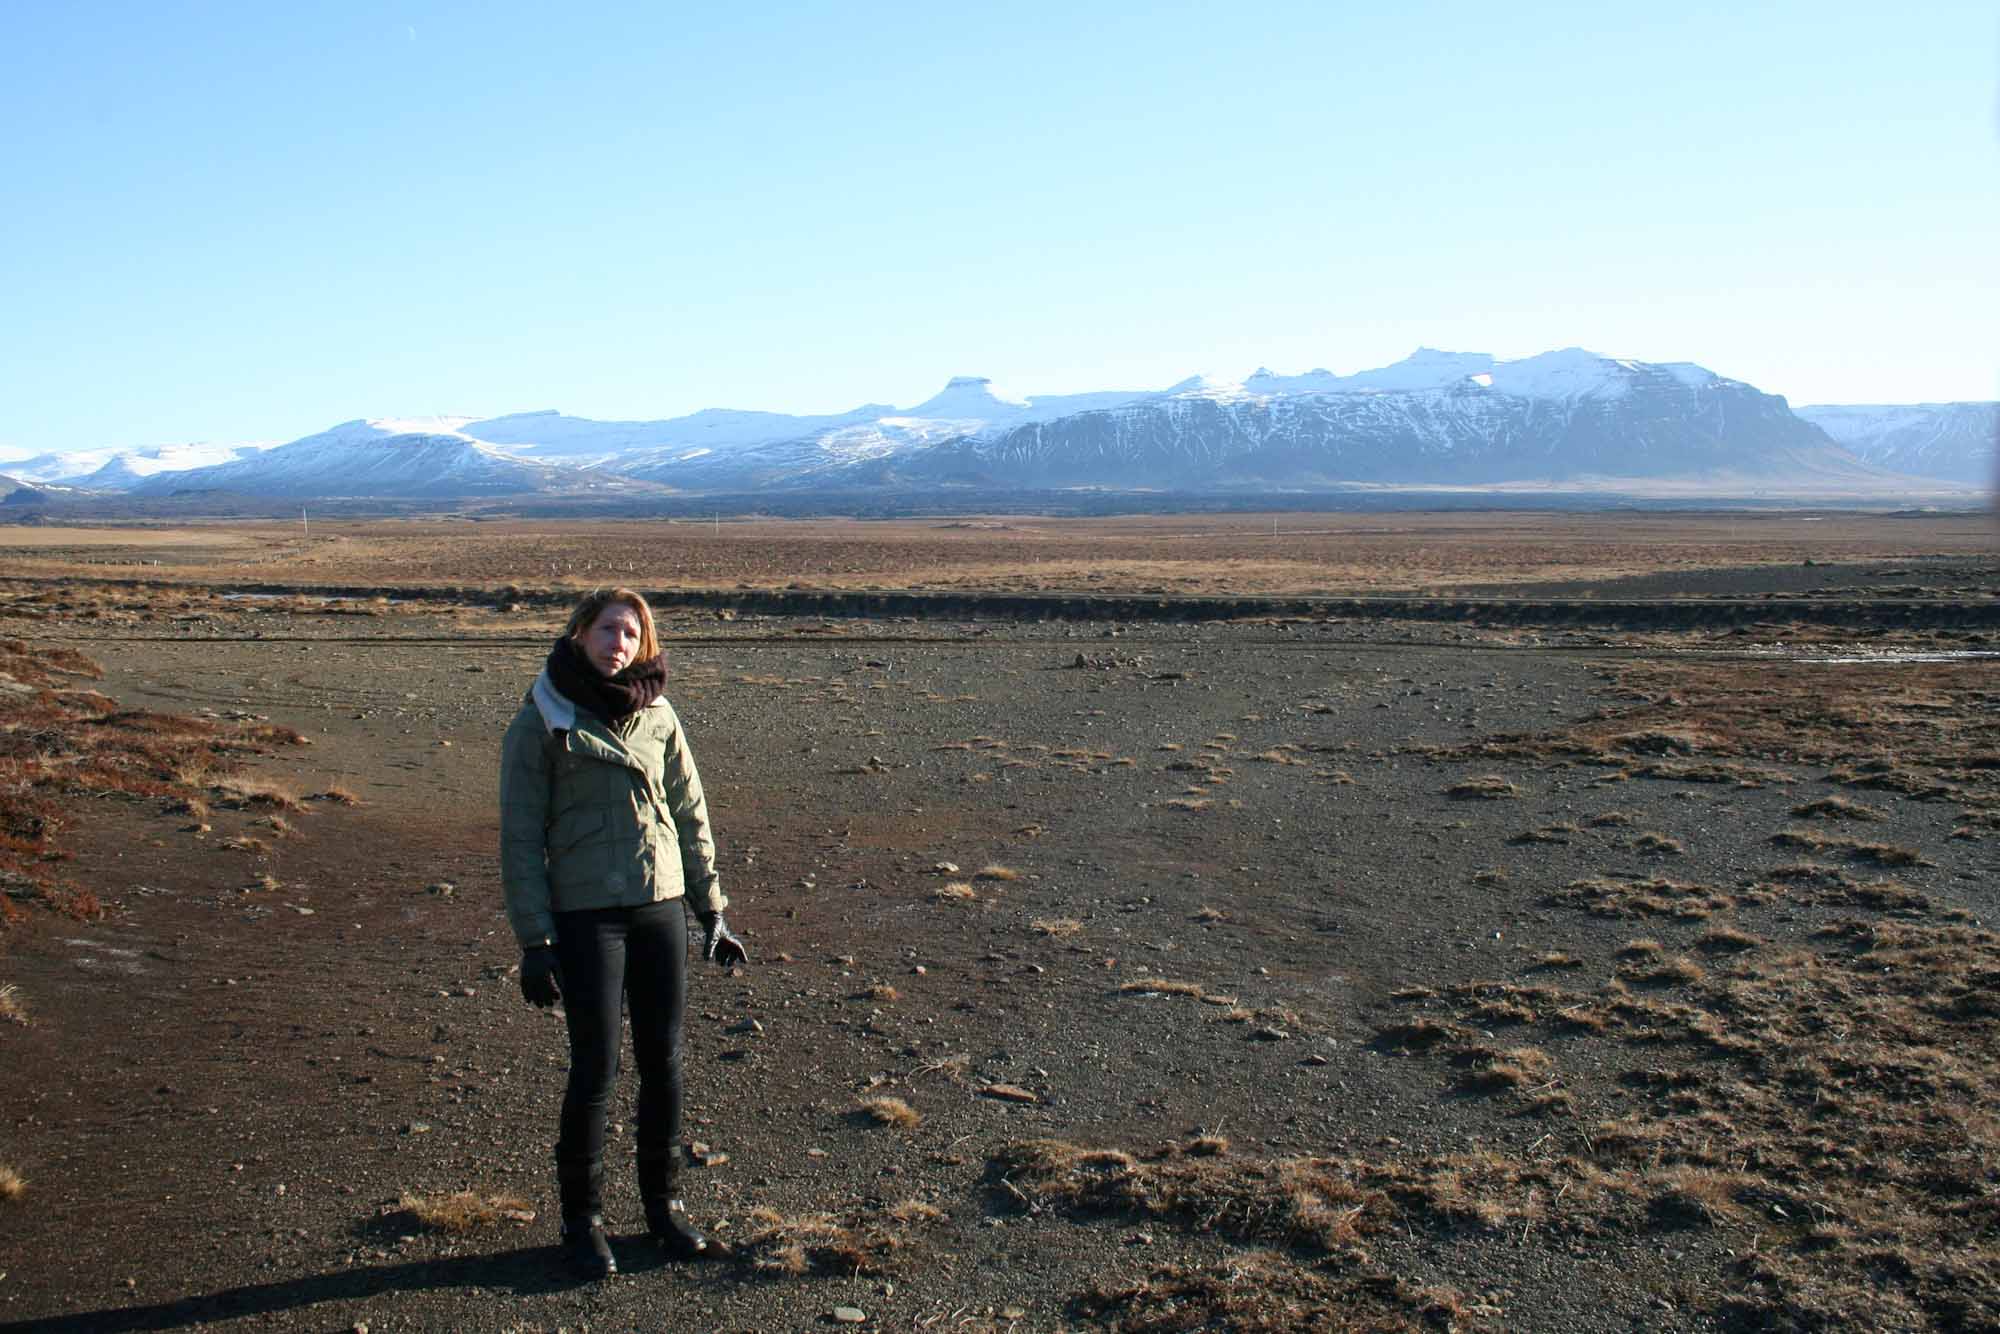 Lady stood in a barren, black sand landscape in Iceland, with snowy mountains behind